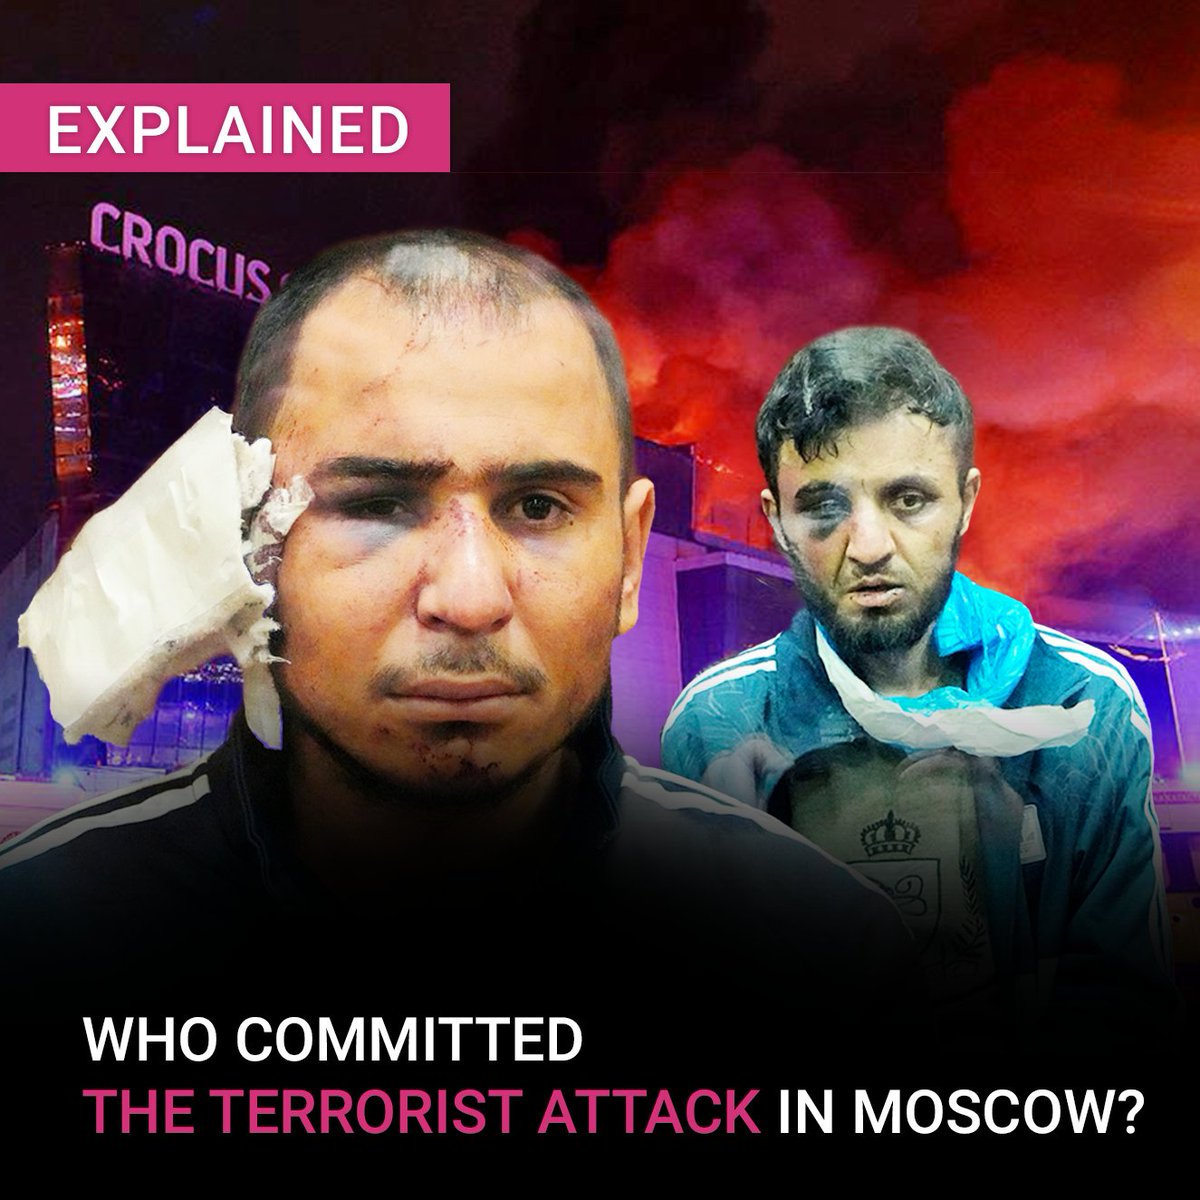 The Russian government and propaganda rushed to pin the terrorist attack in Moscow on Ukraine and the West. In our new explainer video we look at a much more plausible version. Watch here: youtu.be/5Qb9dk8kkEE